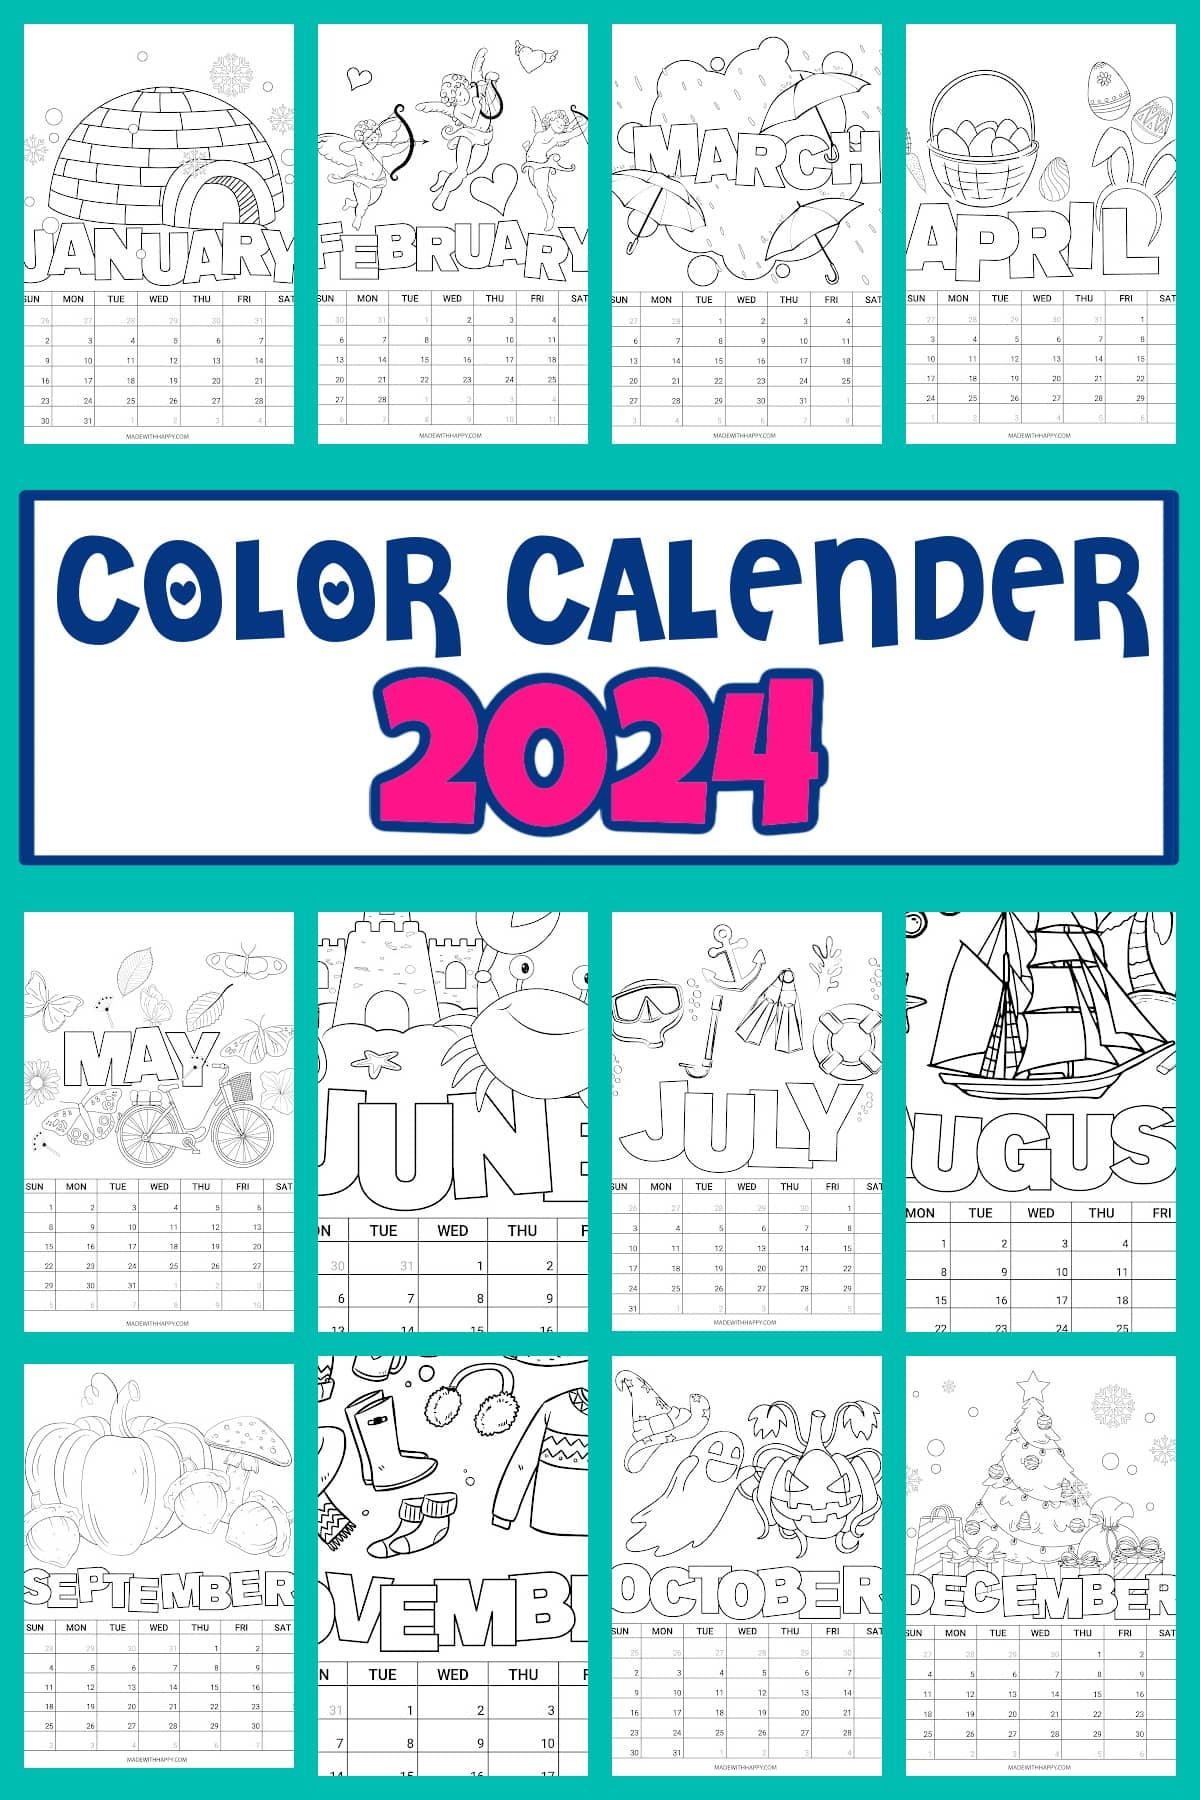 2024 Printable Coloring Calendar For Kids - Made With Happy in Free Printable Calendar 2024 Calendar For Kids